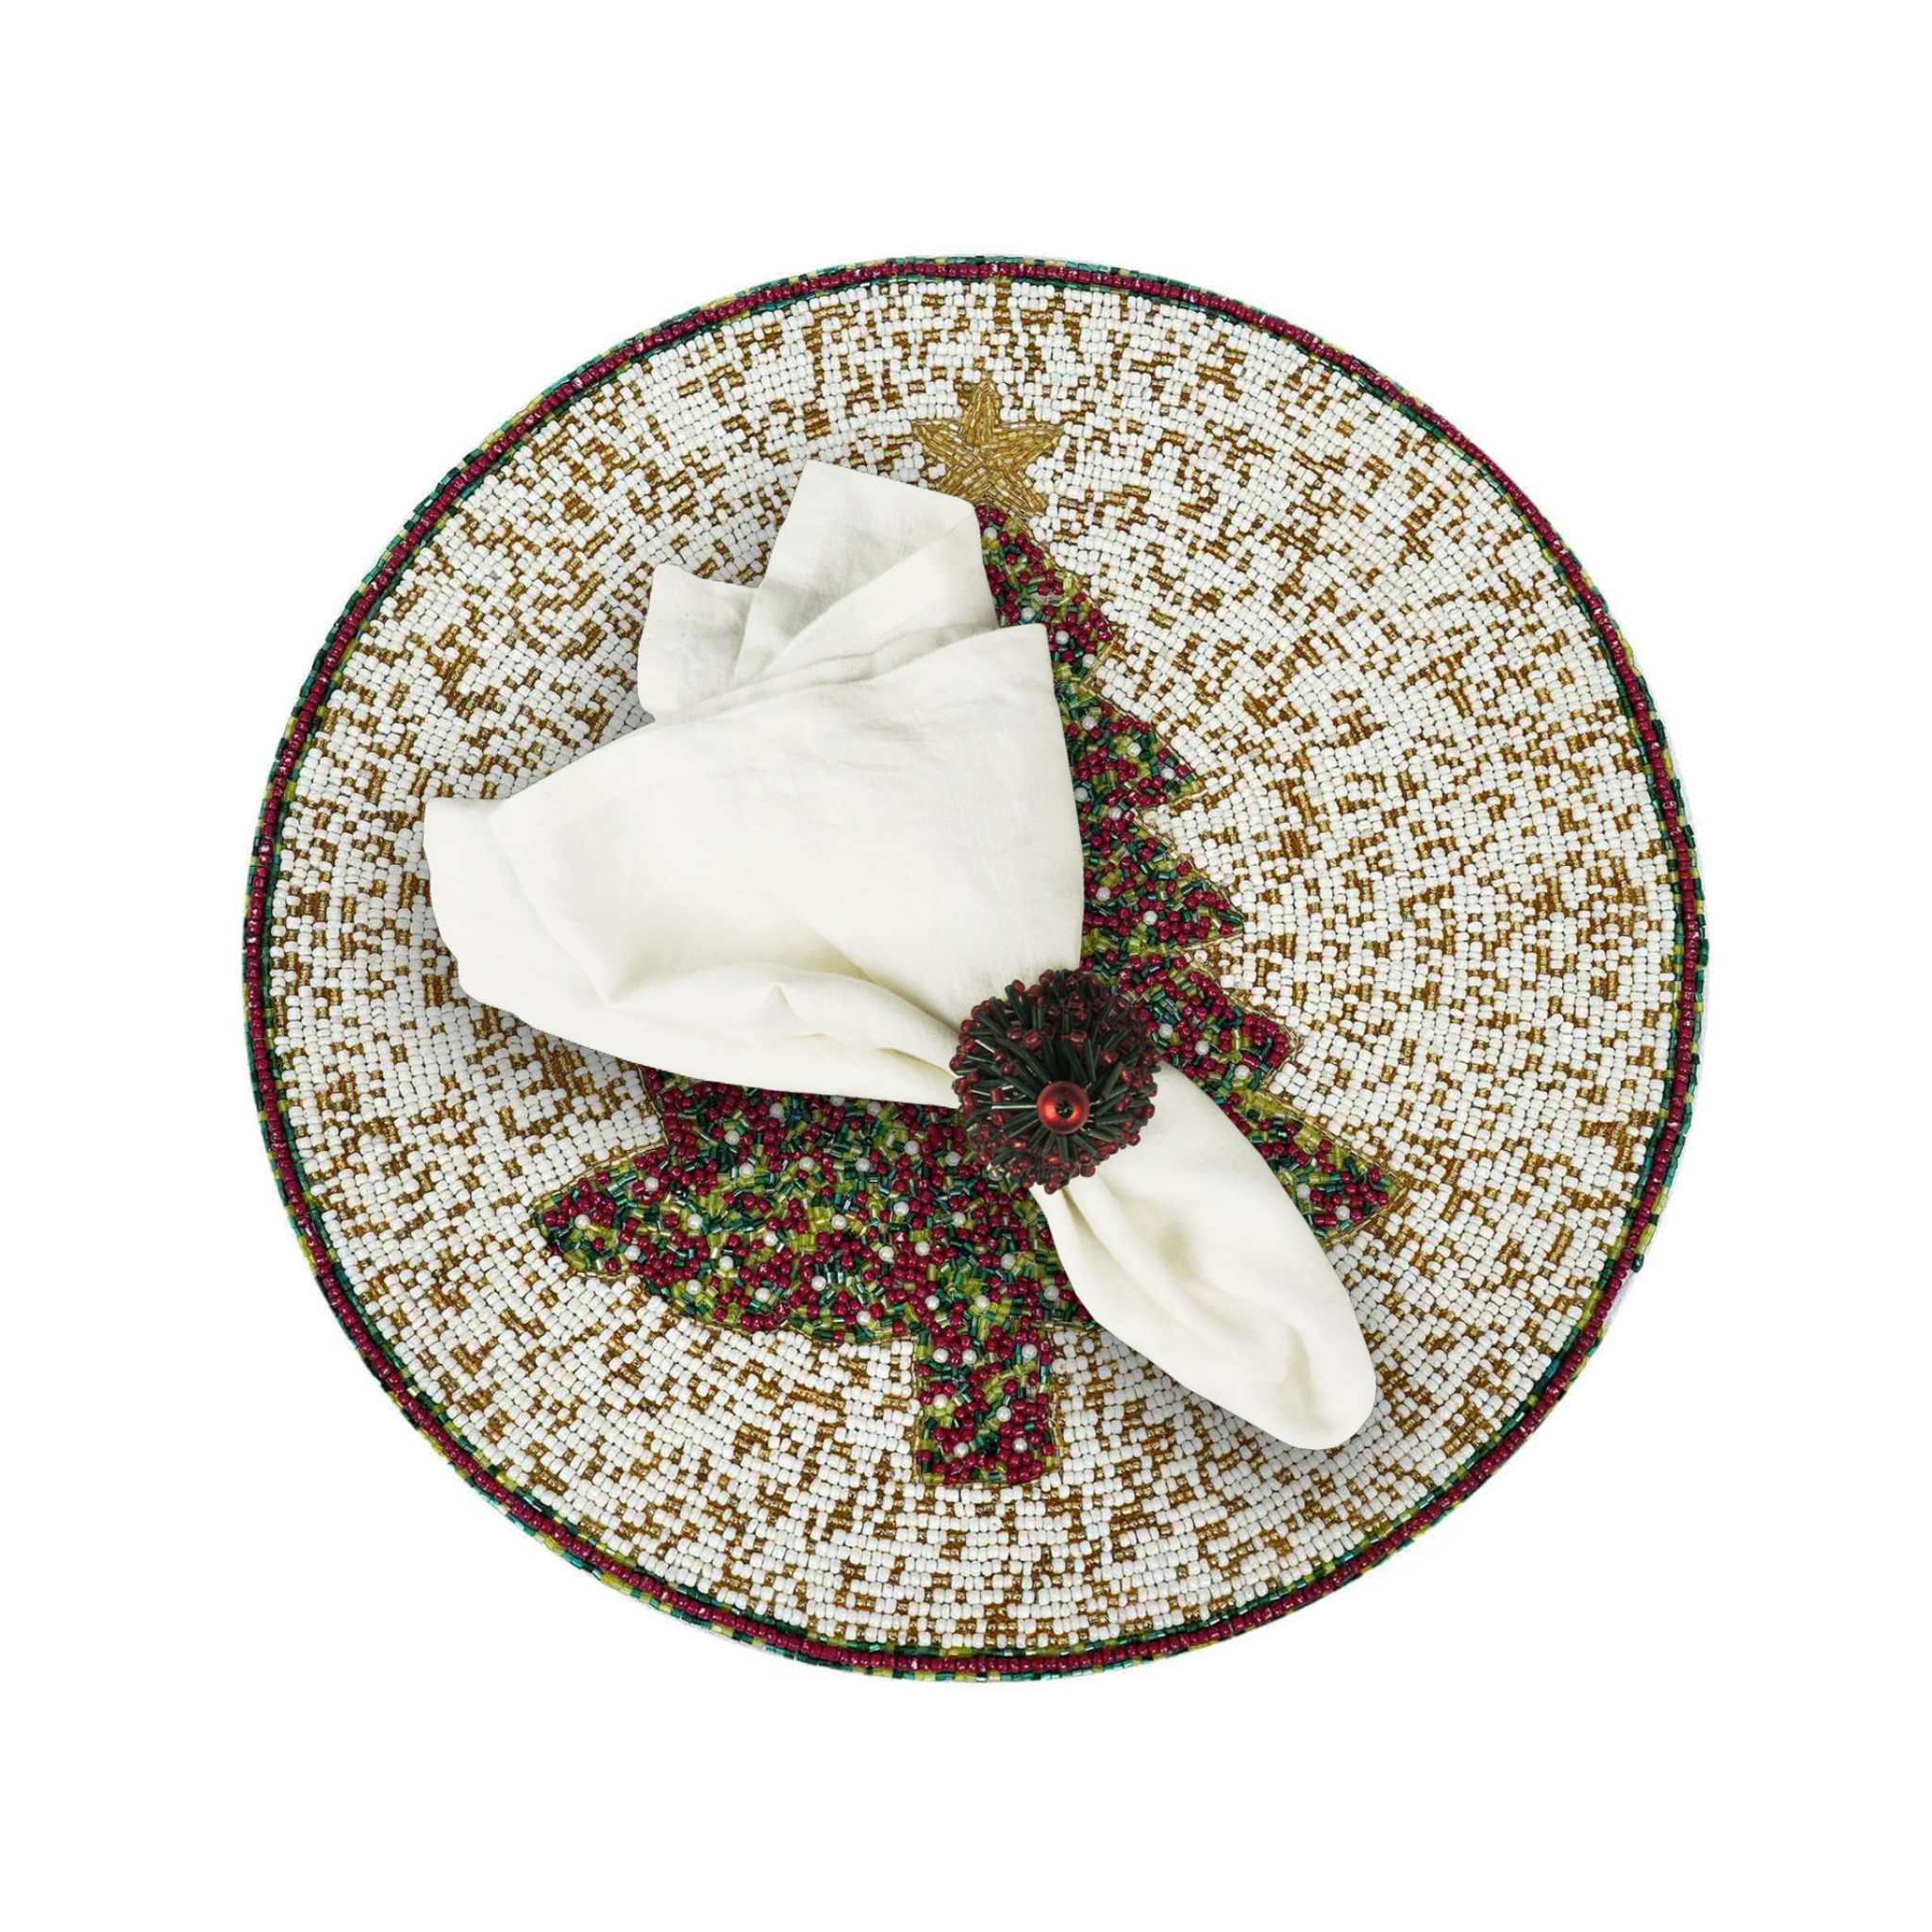 Fir Sure Bead Embroidered Placemat<br>Color: Cream, Red & Green<br>Size: 13.5" Round<br>Set of 2/4